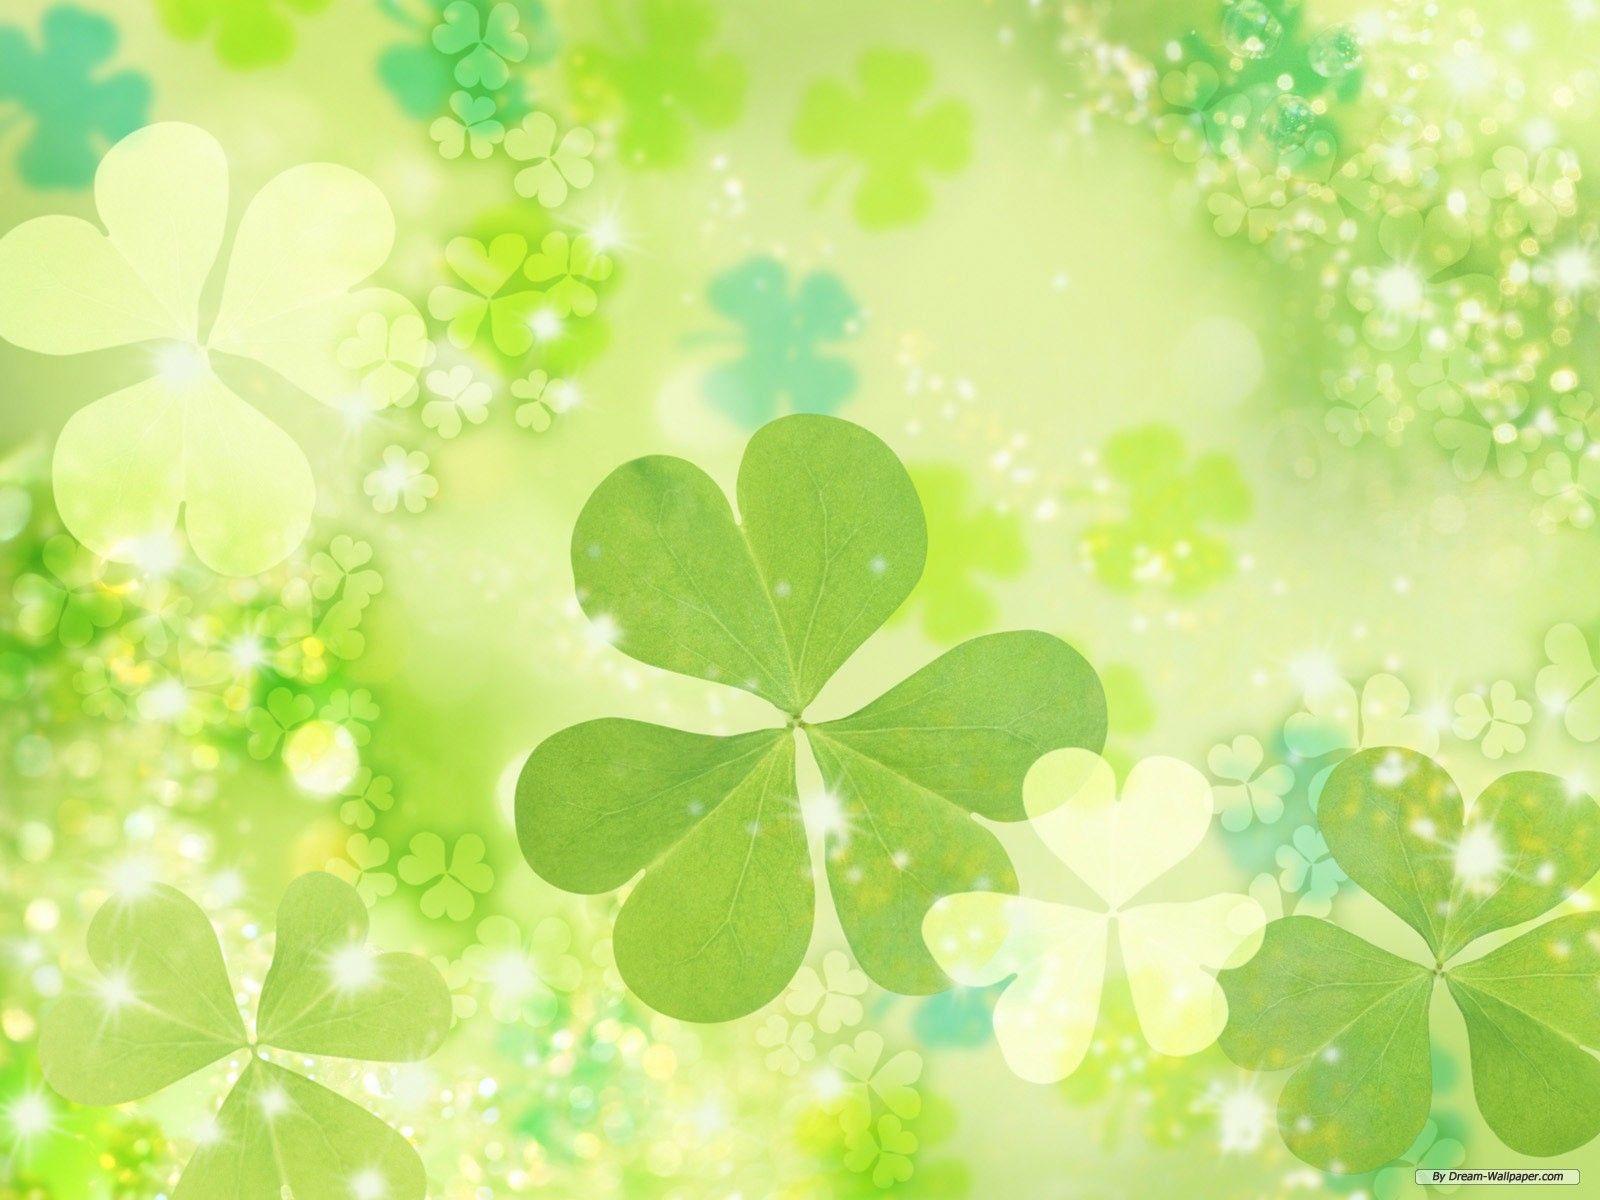 Happy St Patricks Day 2018 Wallpaper Free download. St Paddy Day